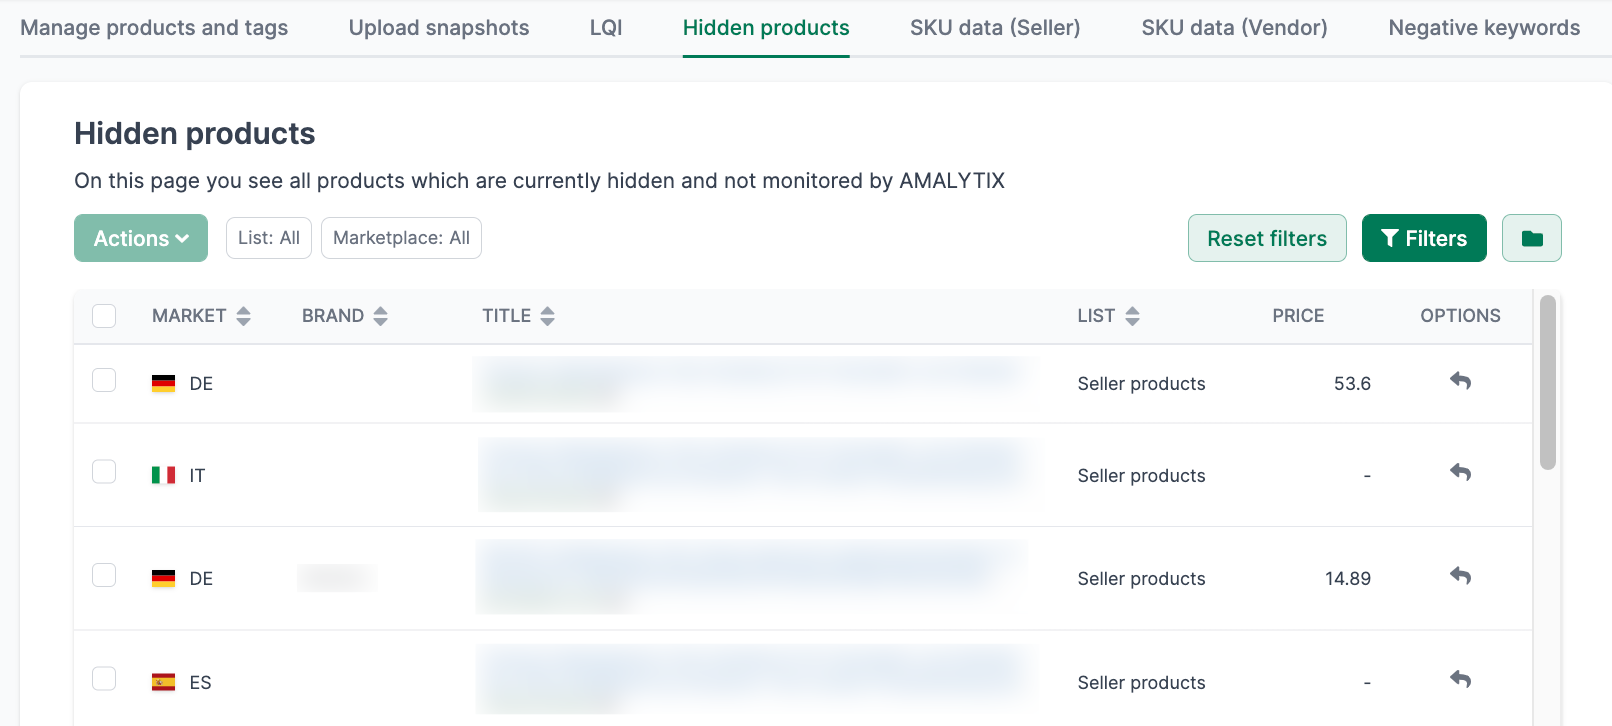 Overview of Amazon hidden products in AMALYTIX